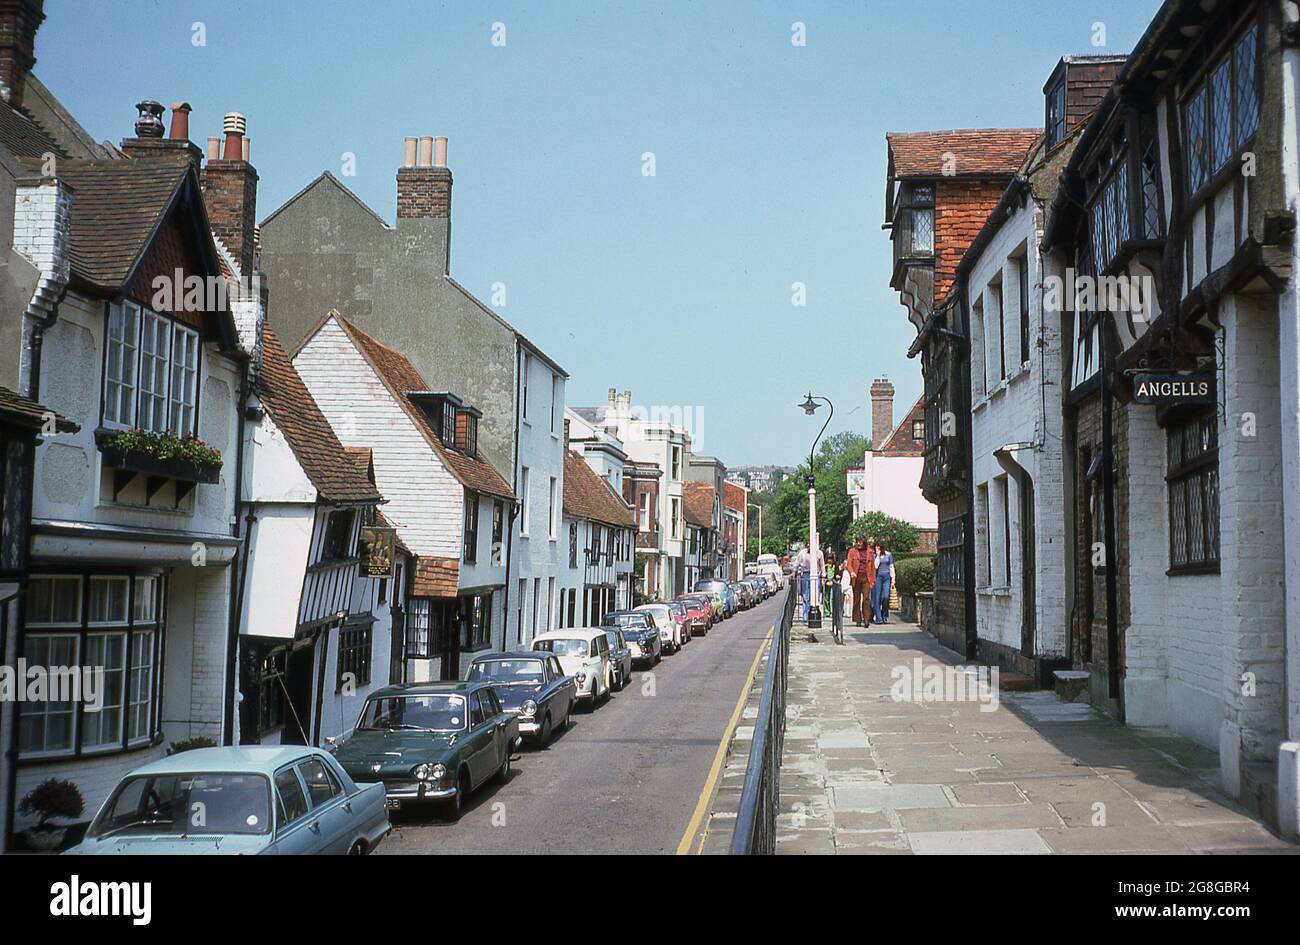 1975, exterior view from this era of the various historical old houses in All Saints Street in the Old Town of Hastings, East Sussex, an ancient port and coastal town on the South Coast of England, UK. The shingle beach in the town, the Stade - Saxon for landing place - has the biggest beach-launched fishing fleet in Europe. Stock Photo